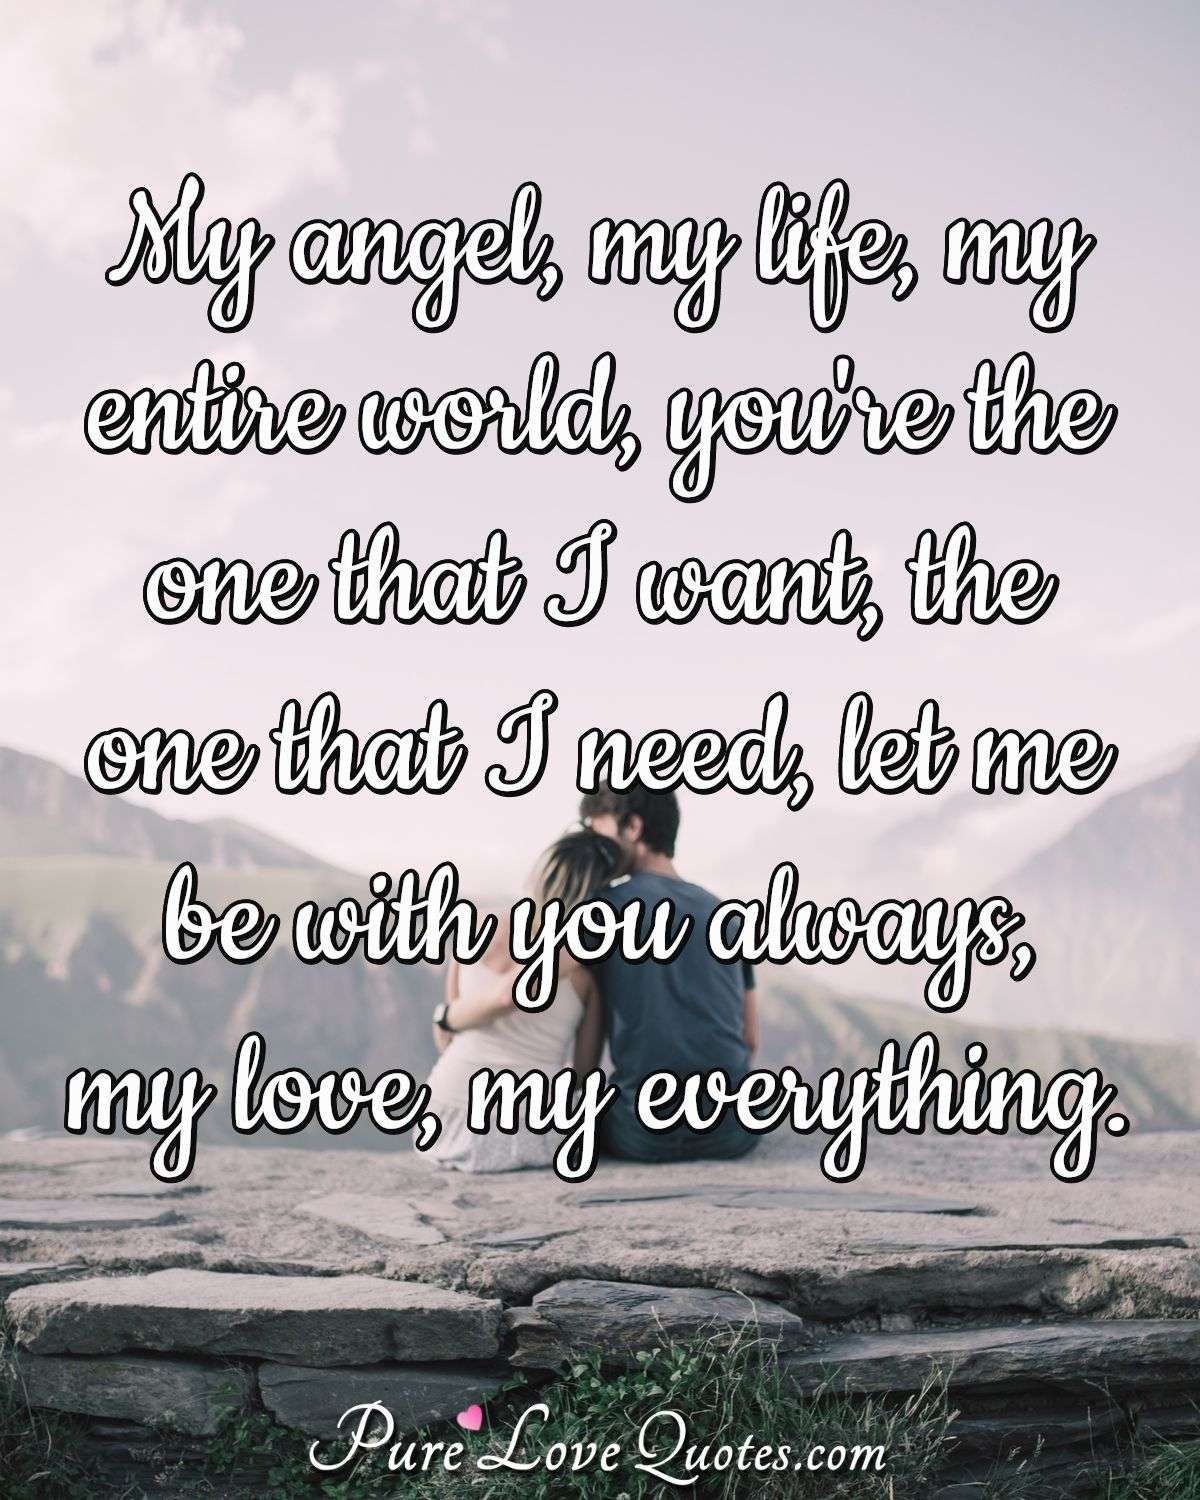 Pure Love Quotes on Twitter: "My angel, my life, my entire world, you&...